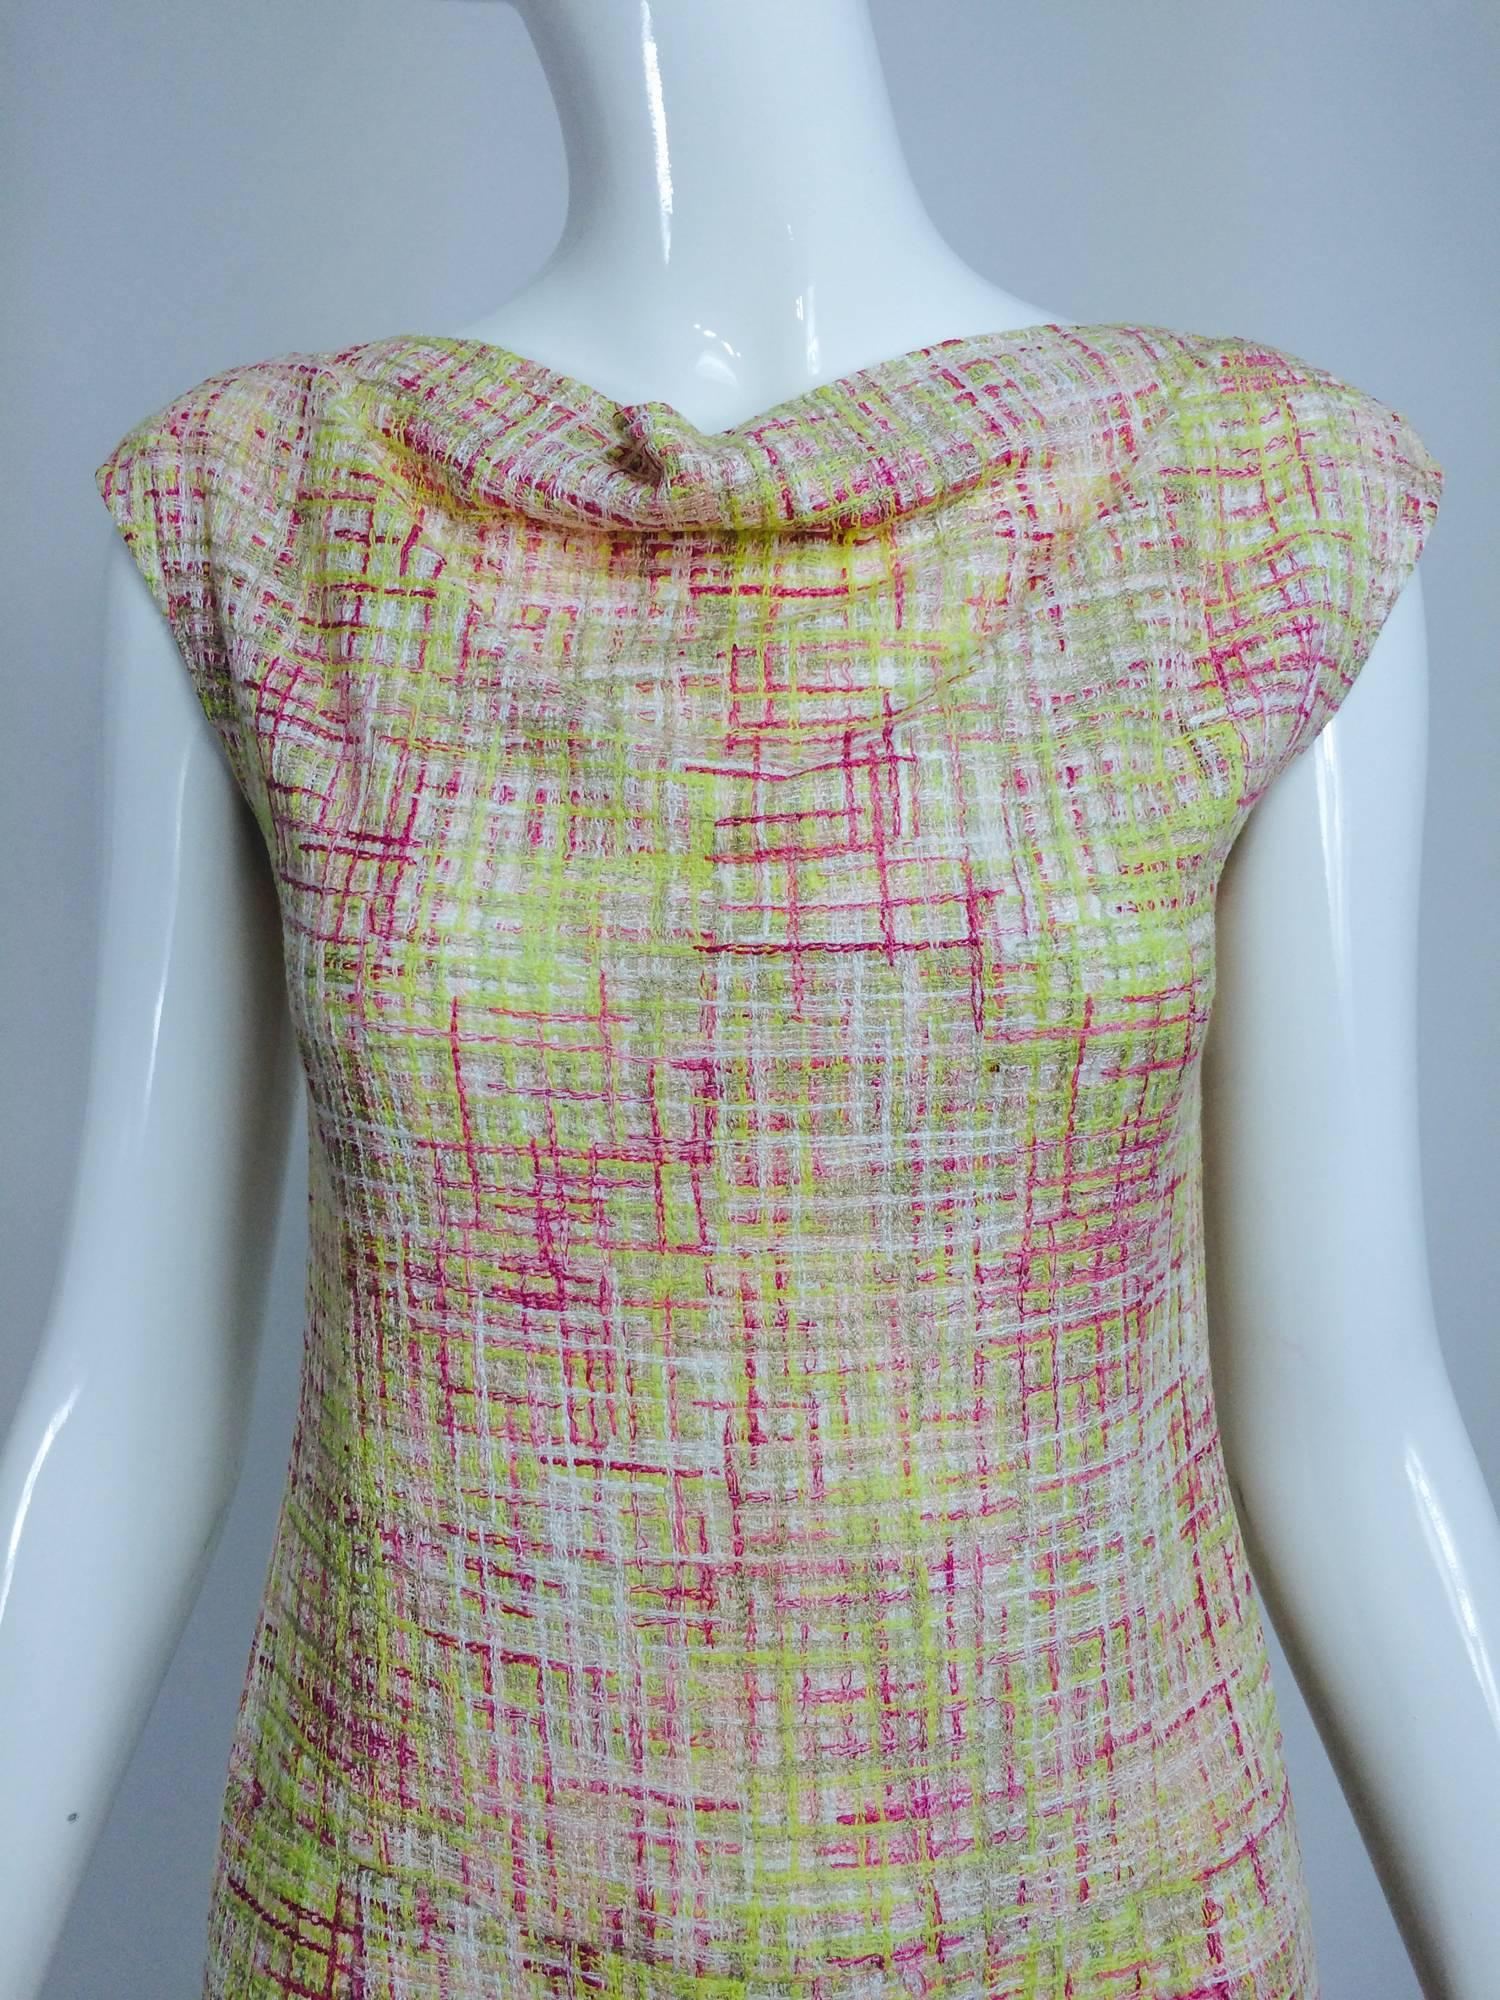 Chanel yellow, pink & cream tweed sleeveless shift dress 1998P. Chanel for summer, cotton tweed in sunny colours. Princess seamed, sleeveless dress with cowl neckline, fitted with seamed dropped waist,  on seam side pockets, back zipper closure with